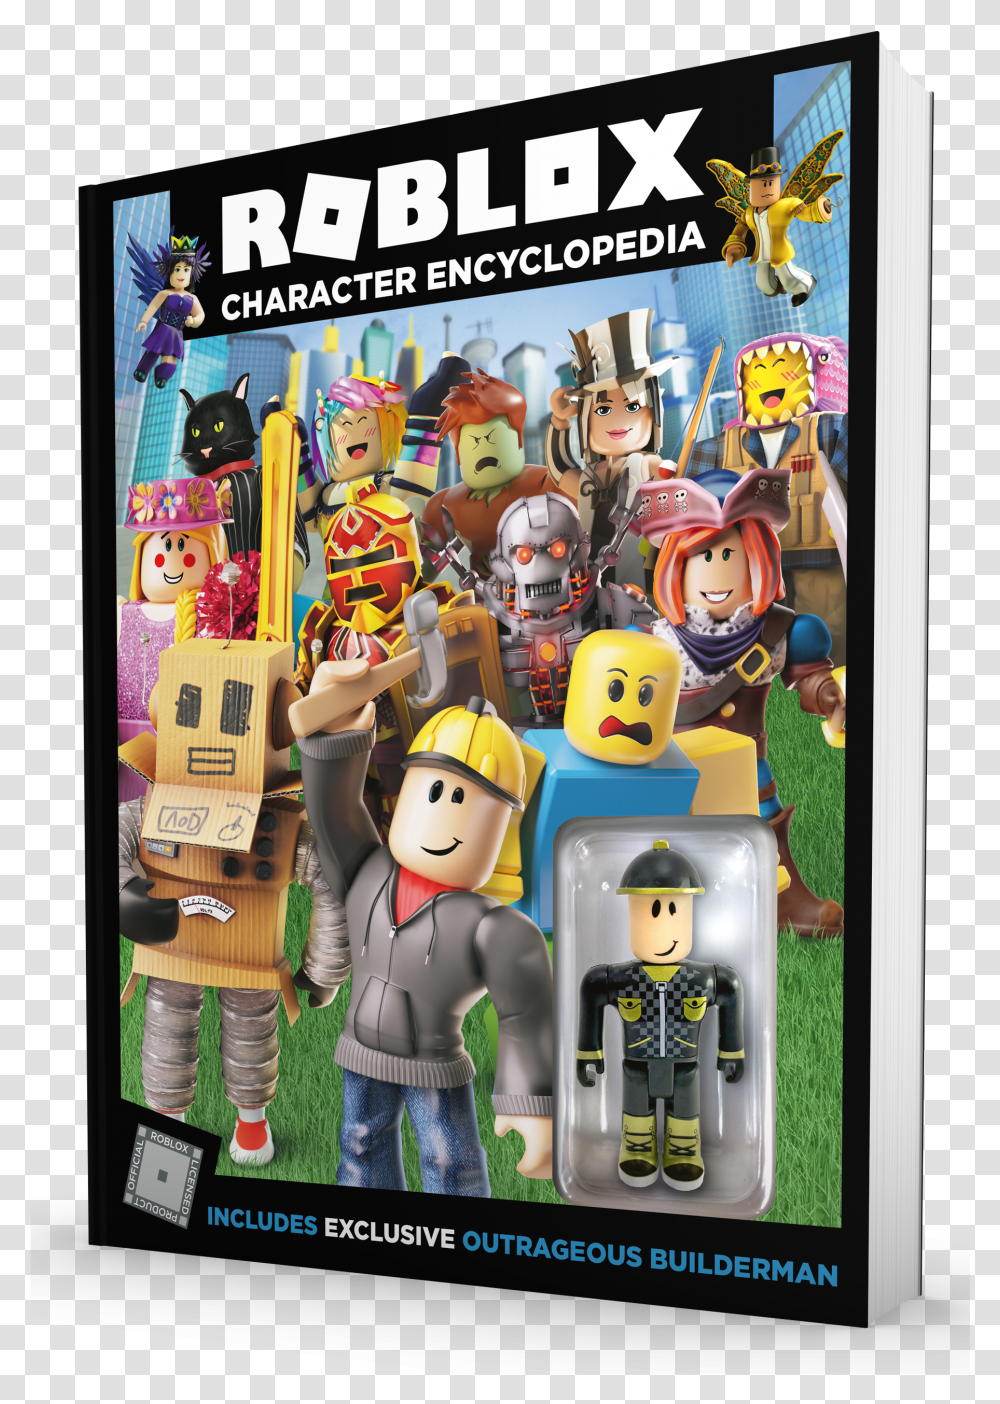 Roblox Books Launching September 2018 Egmont Uk Roblox Character Encyclopedia Roblox Transparent Png